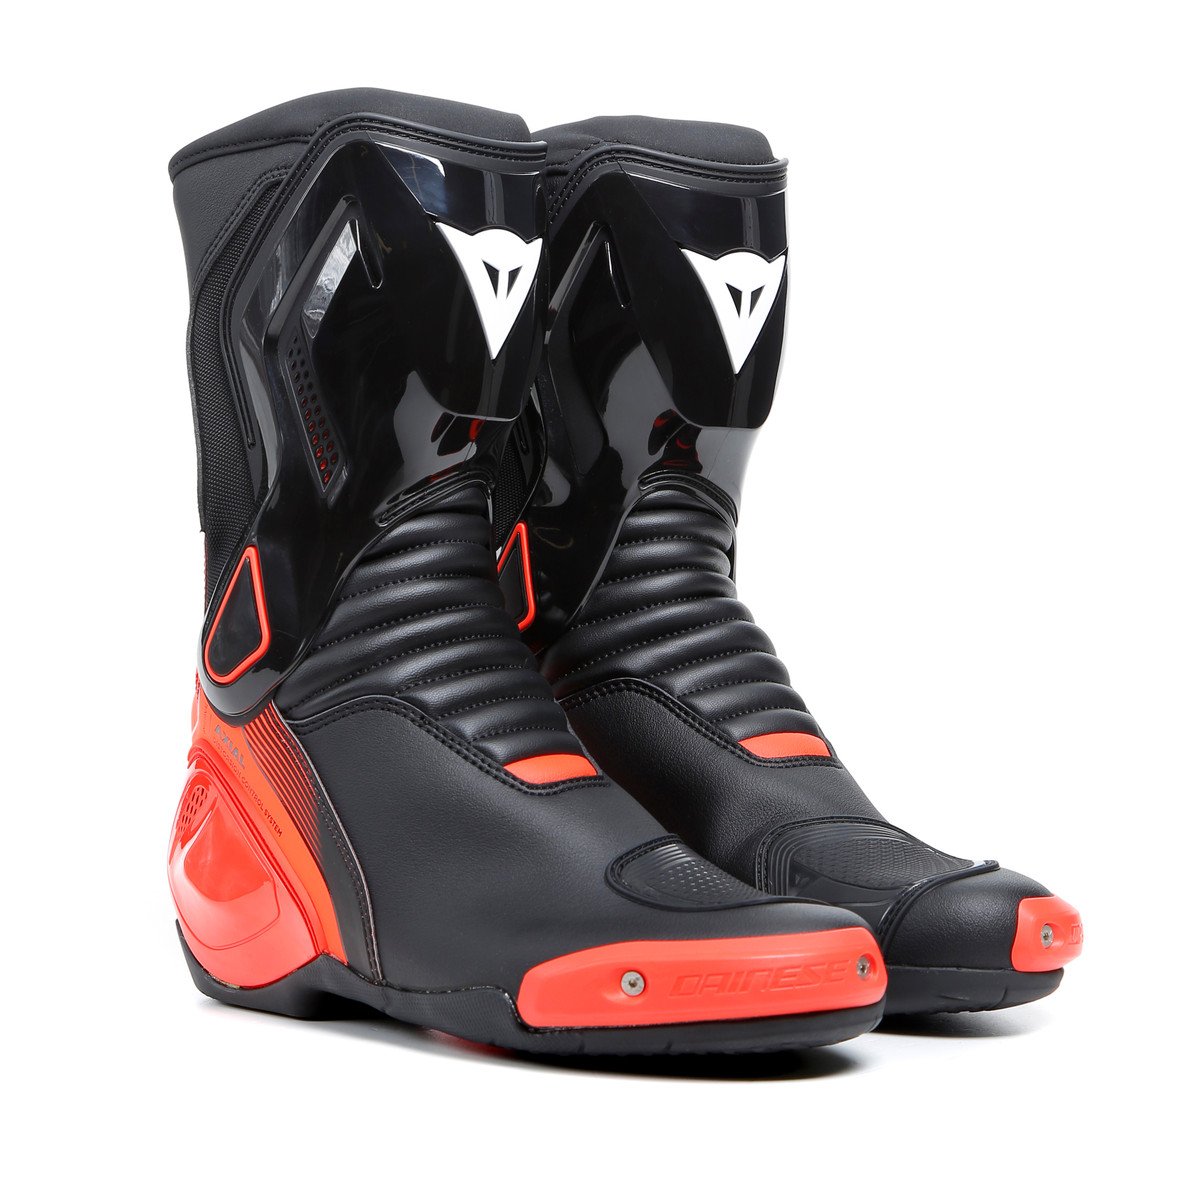 Image of Dainese Nexus 2 Boots Black Fluo Red Size 39 ID 8051019292797